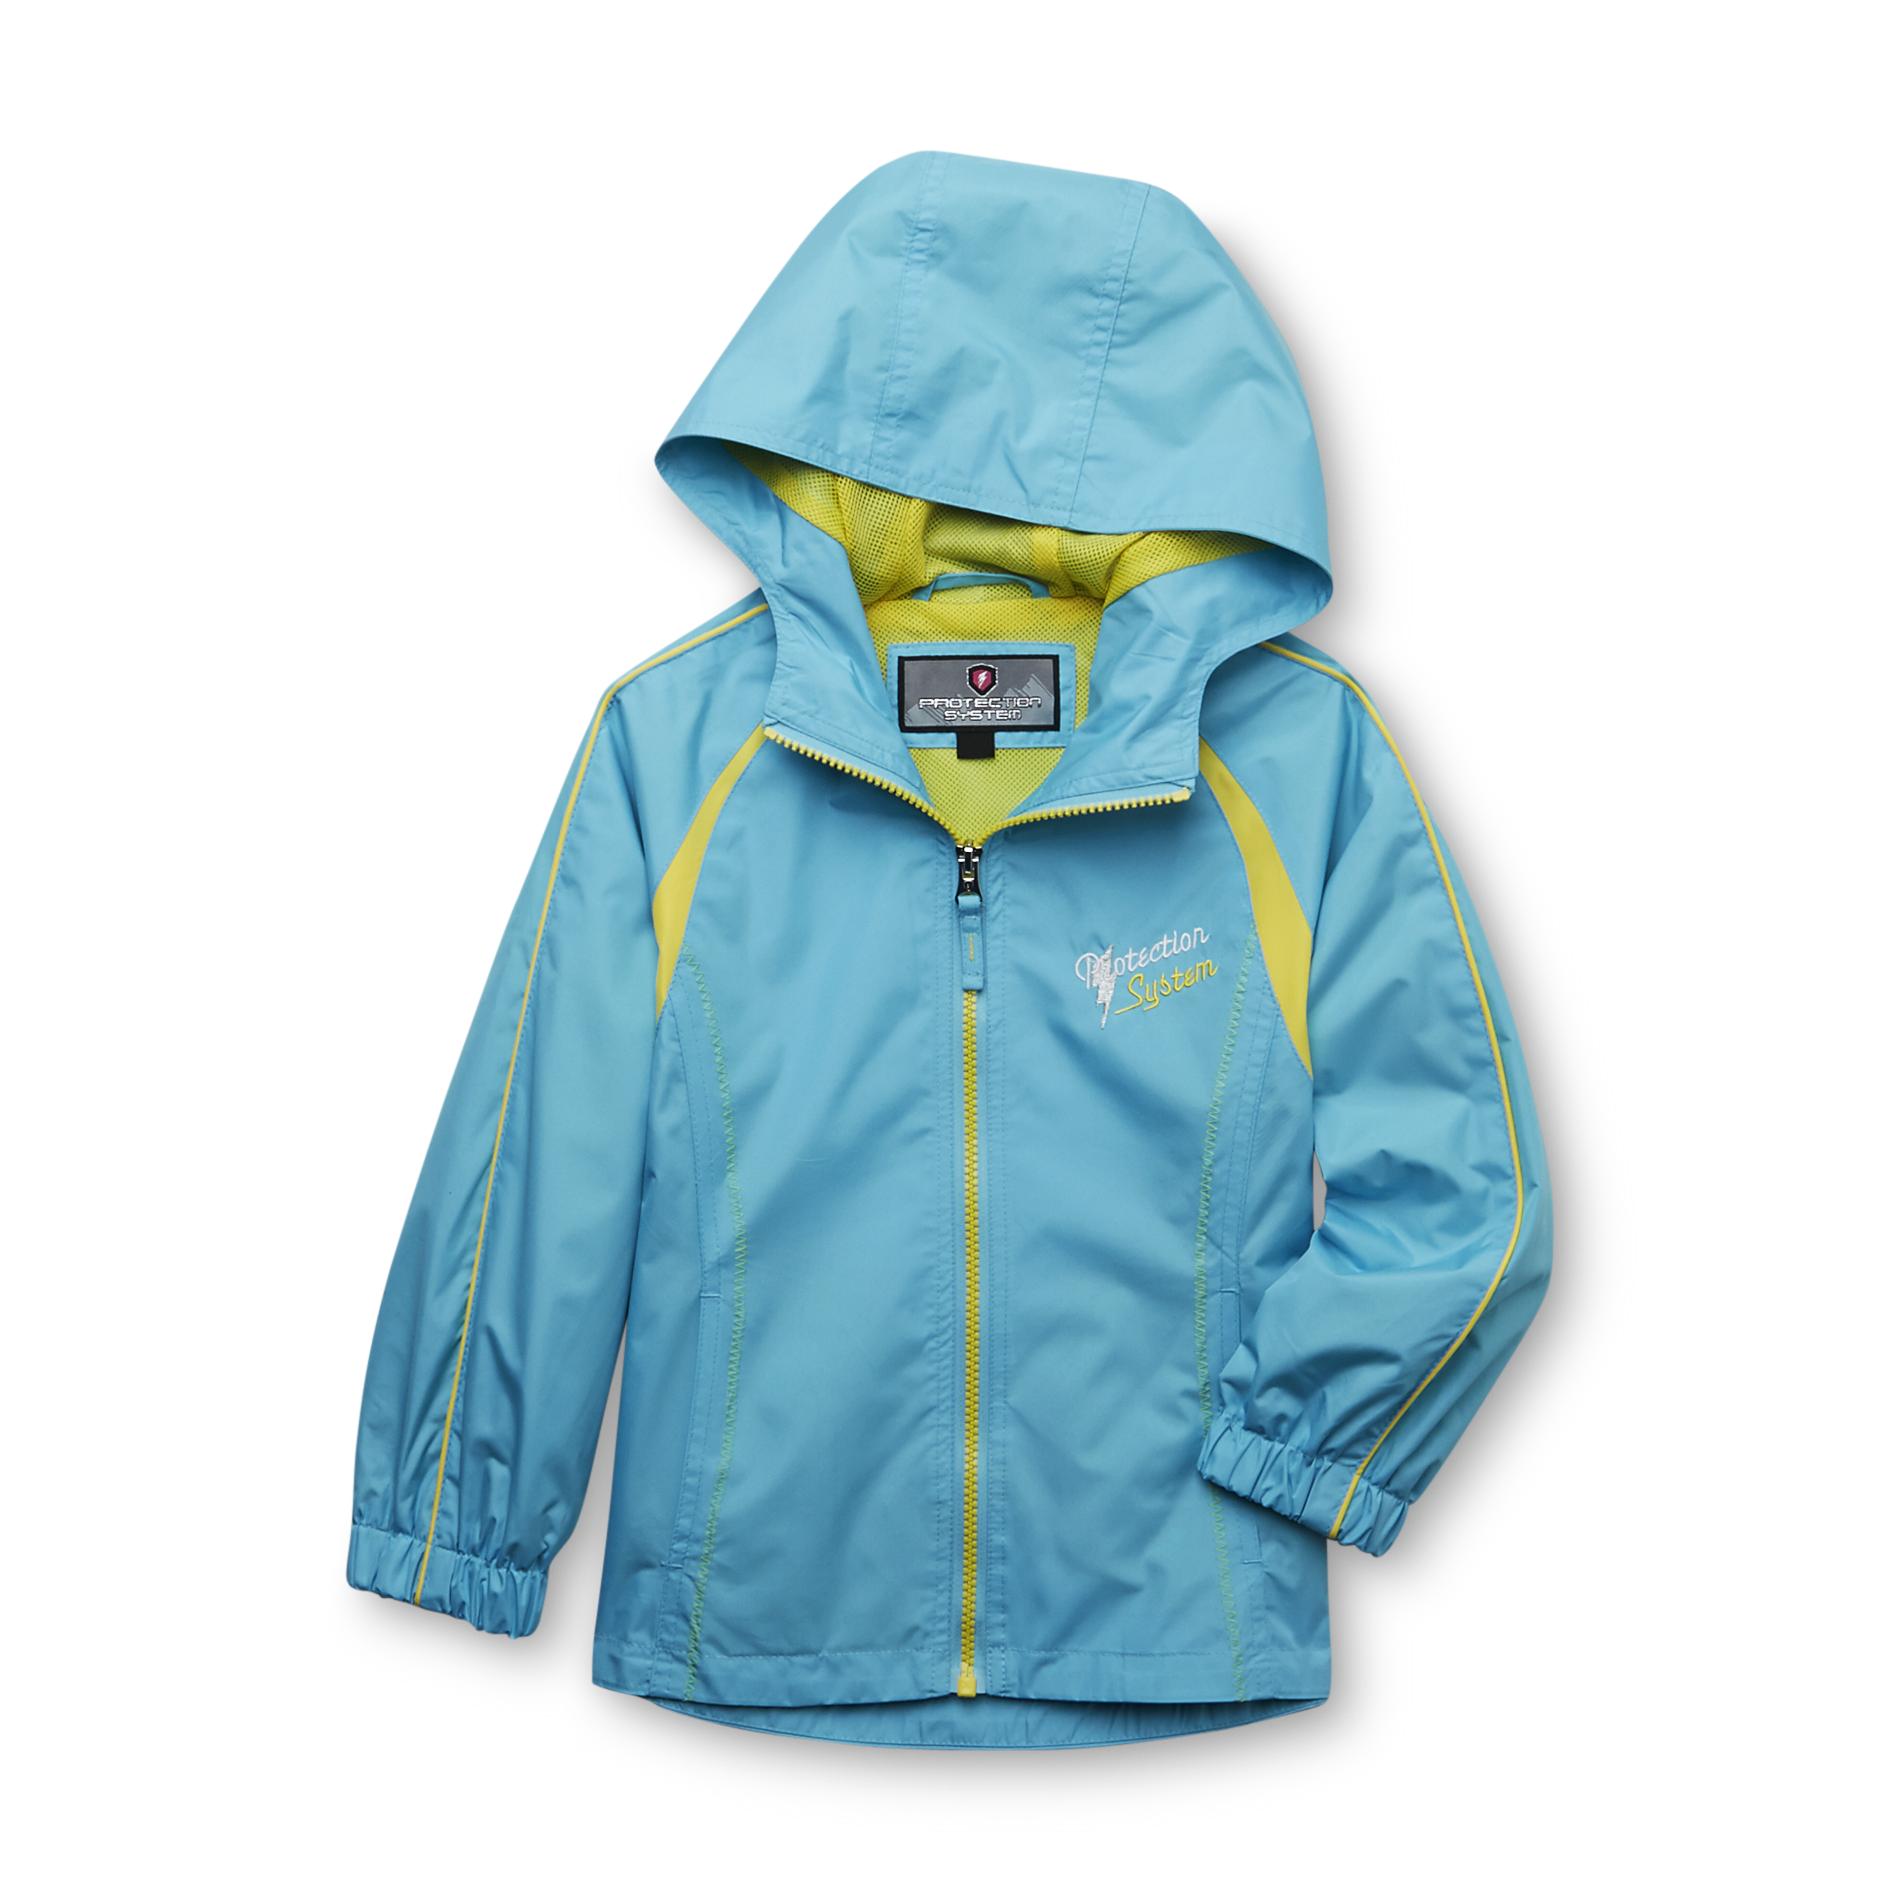 Protection System Girl's Two-Tone Hooded Jacket